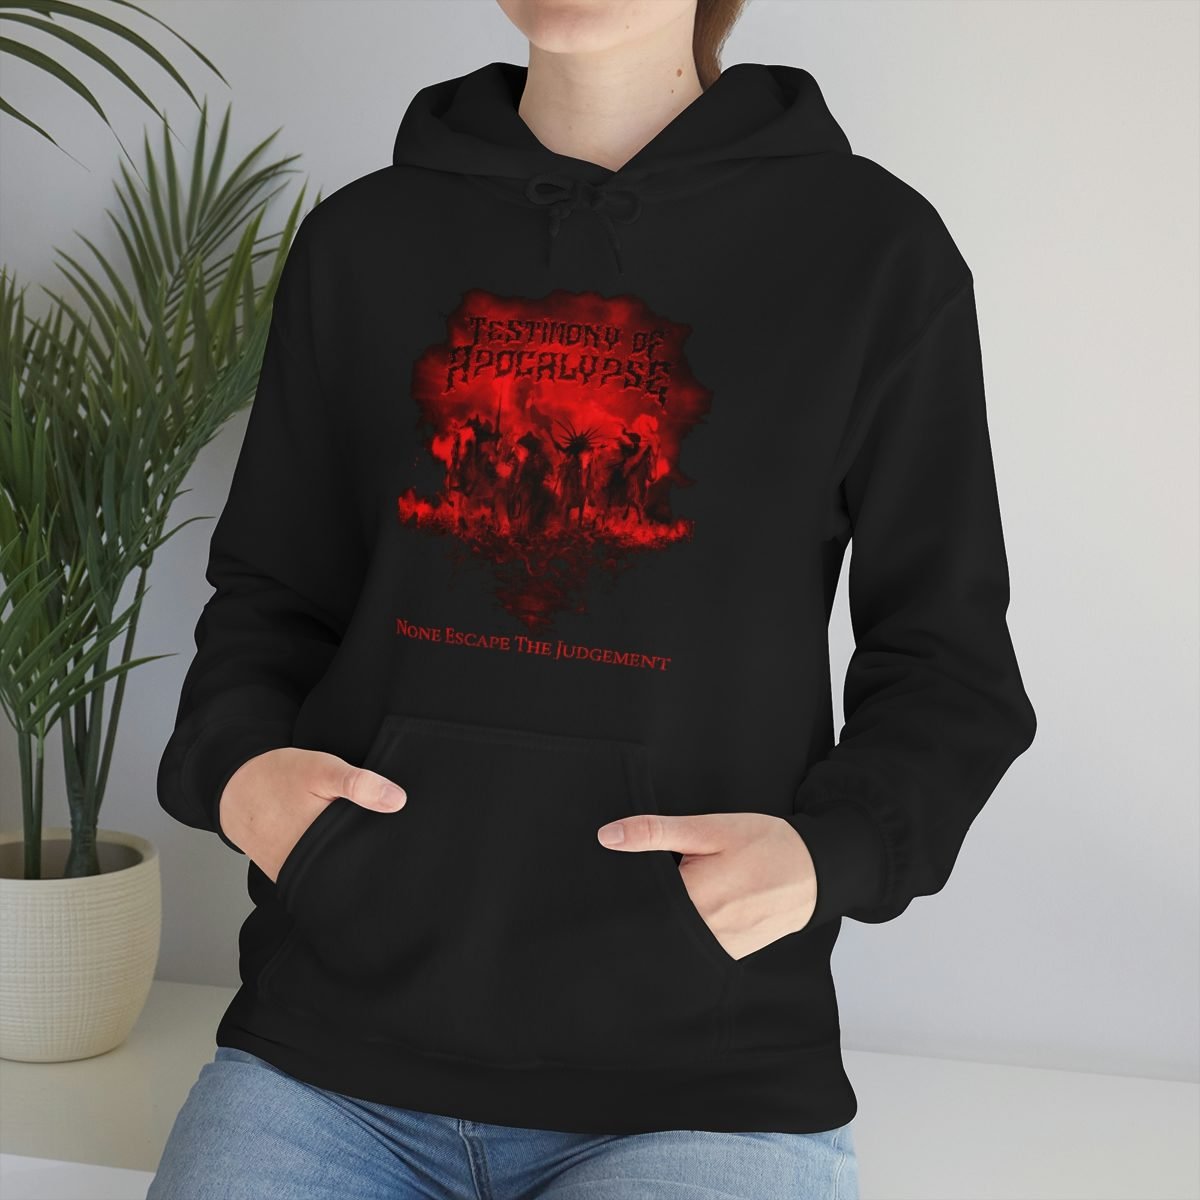 Testimony of Apocalypse – None Escape The Judgement Pullover Hooded Sweatshirt 185MD